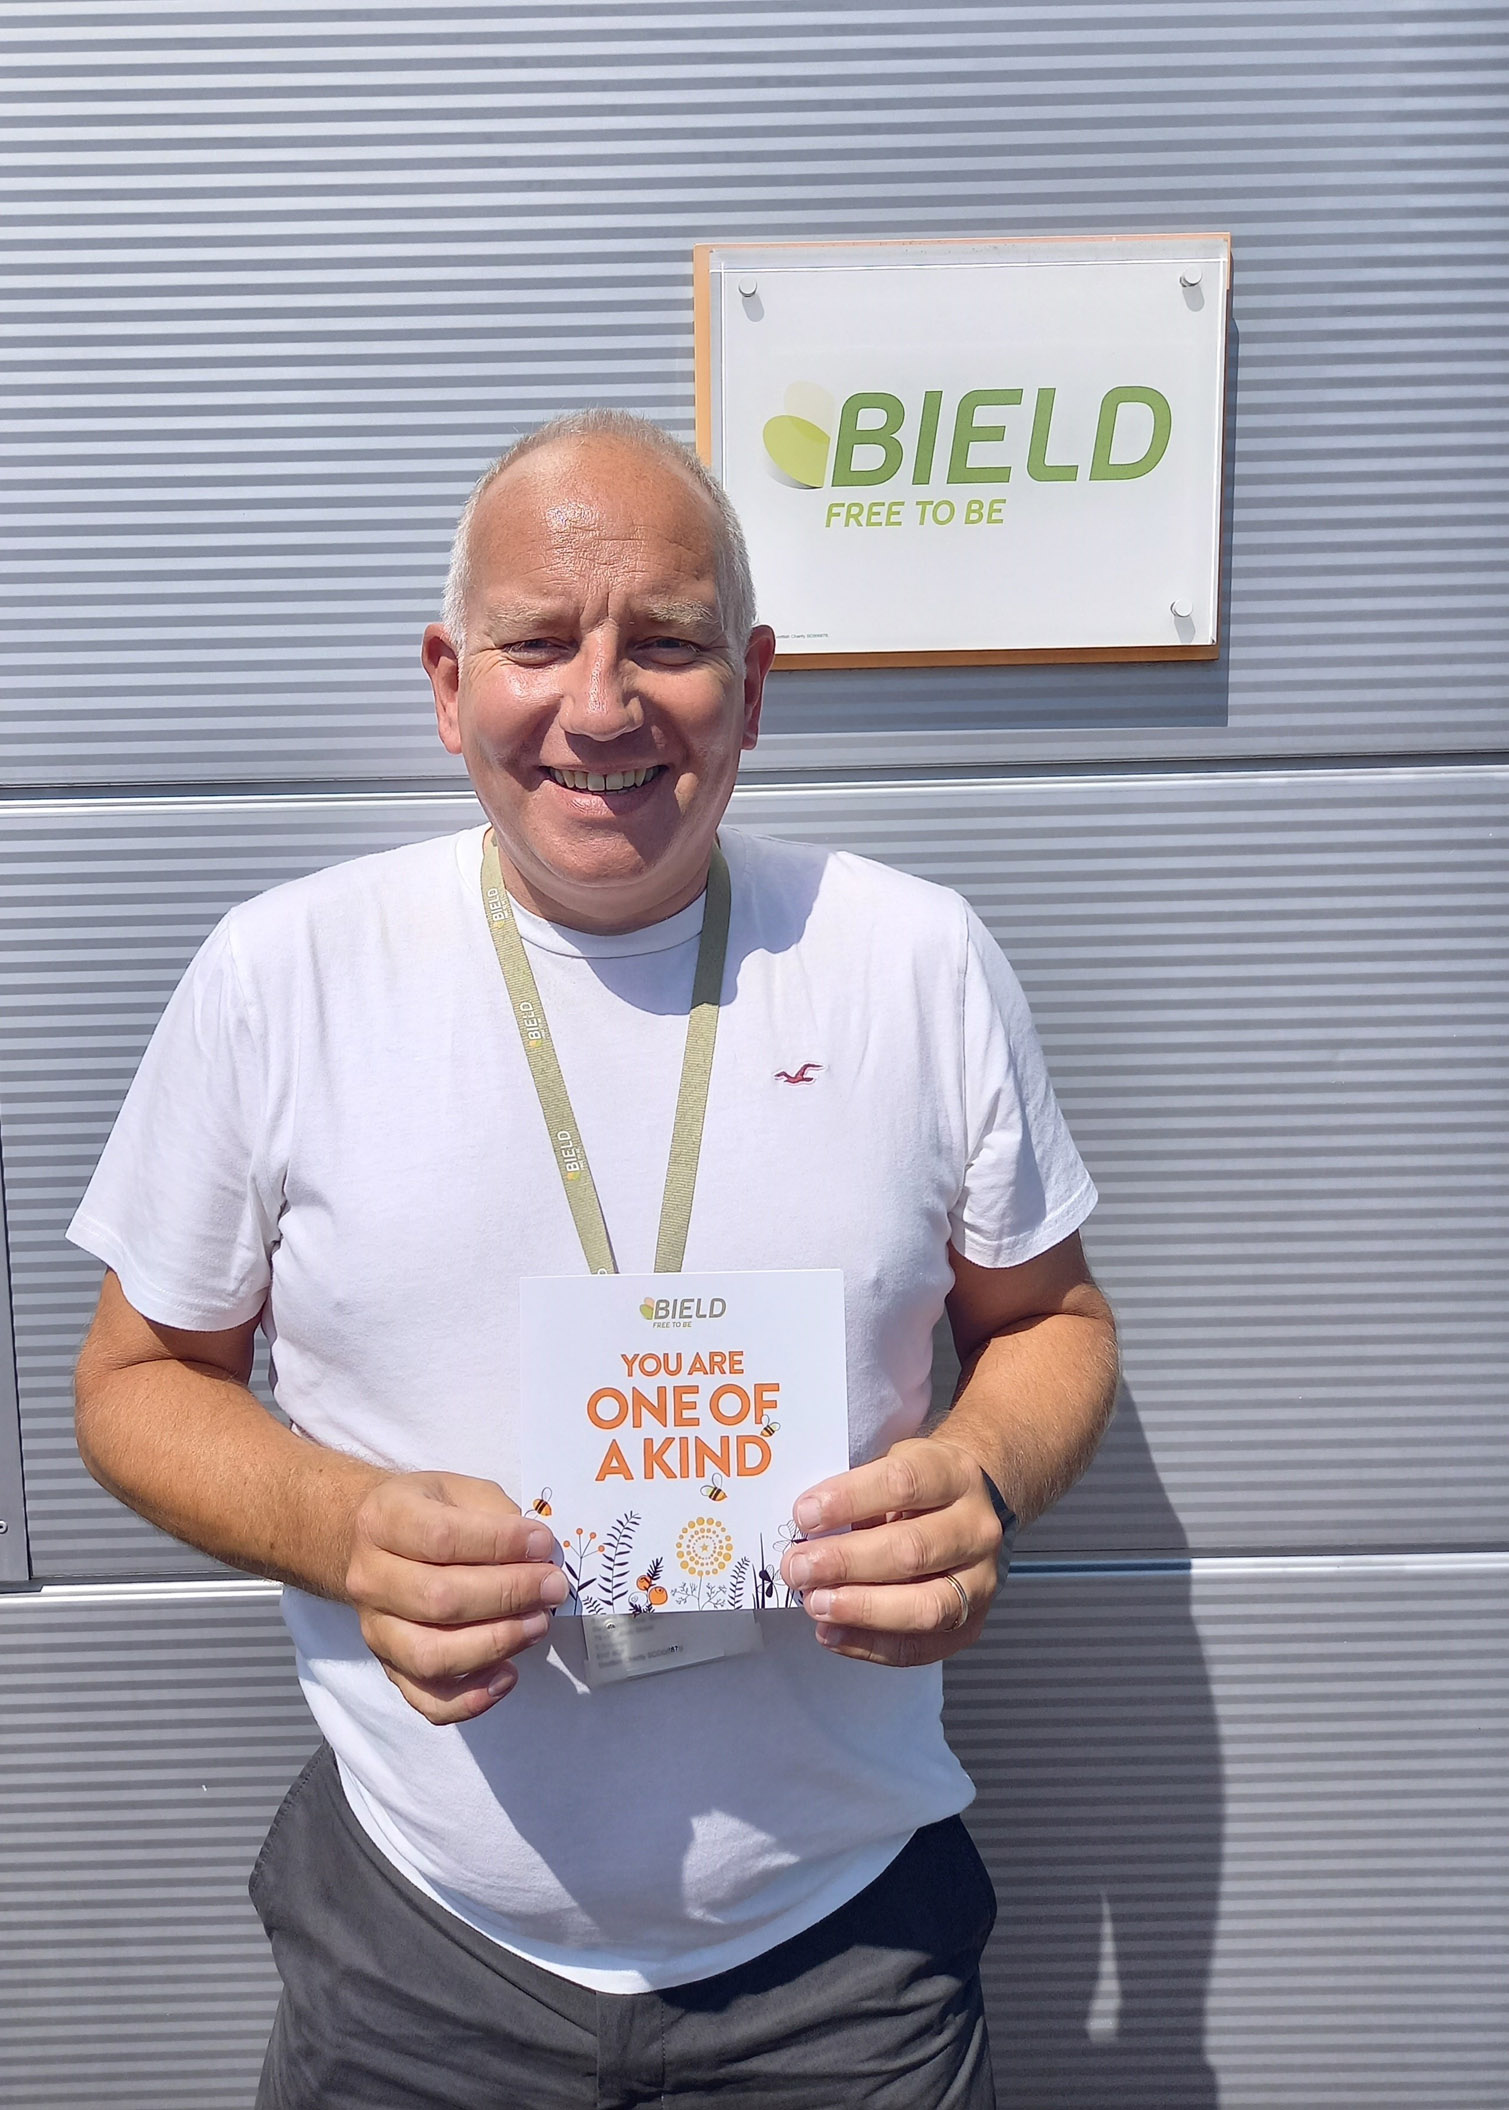 Property manager’s heart of gold inspires kindness award from Bield